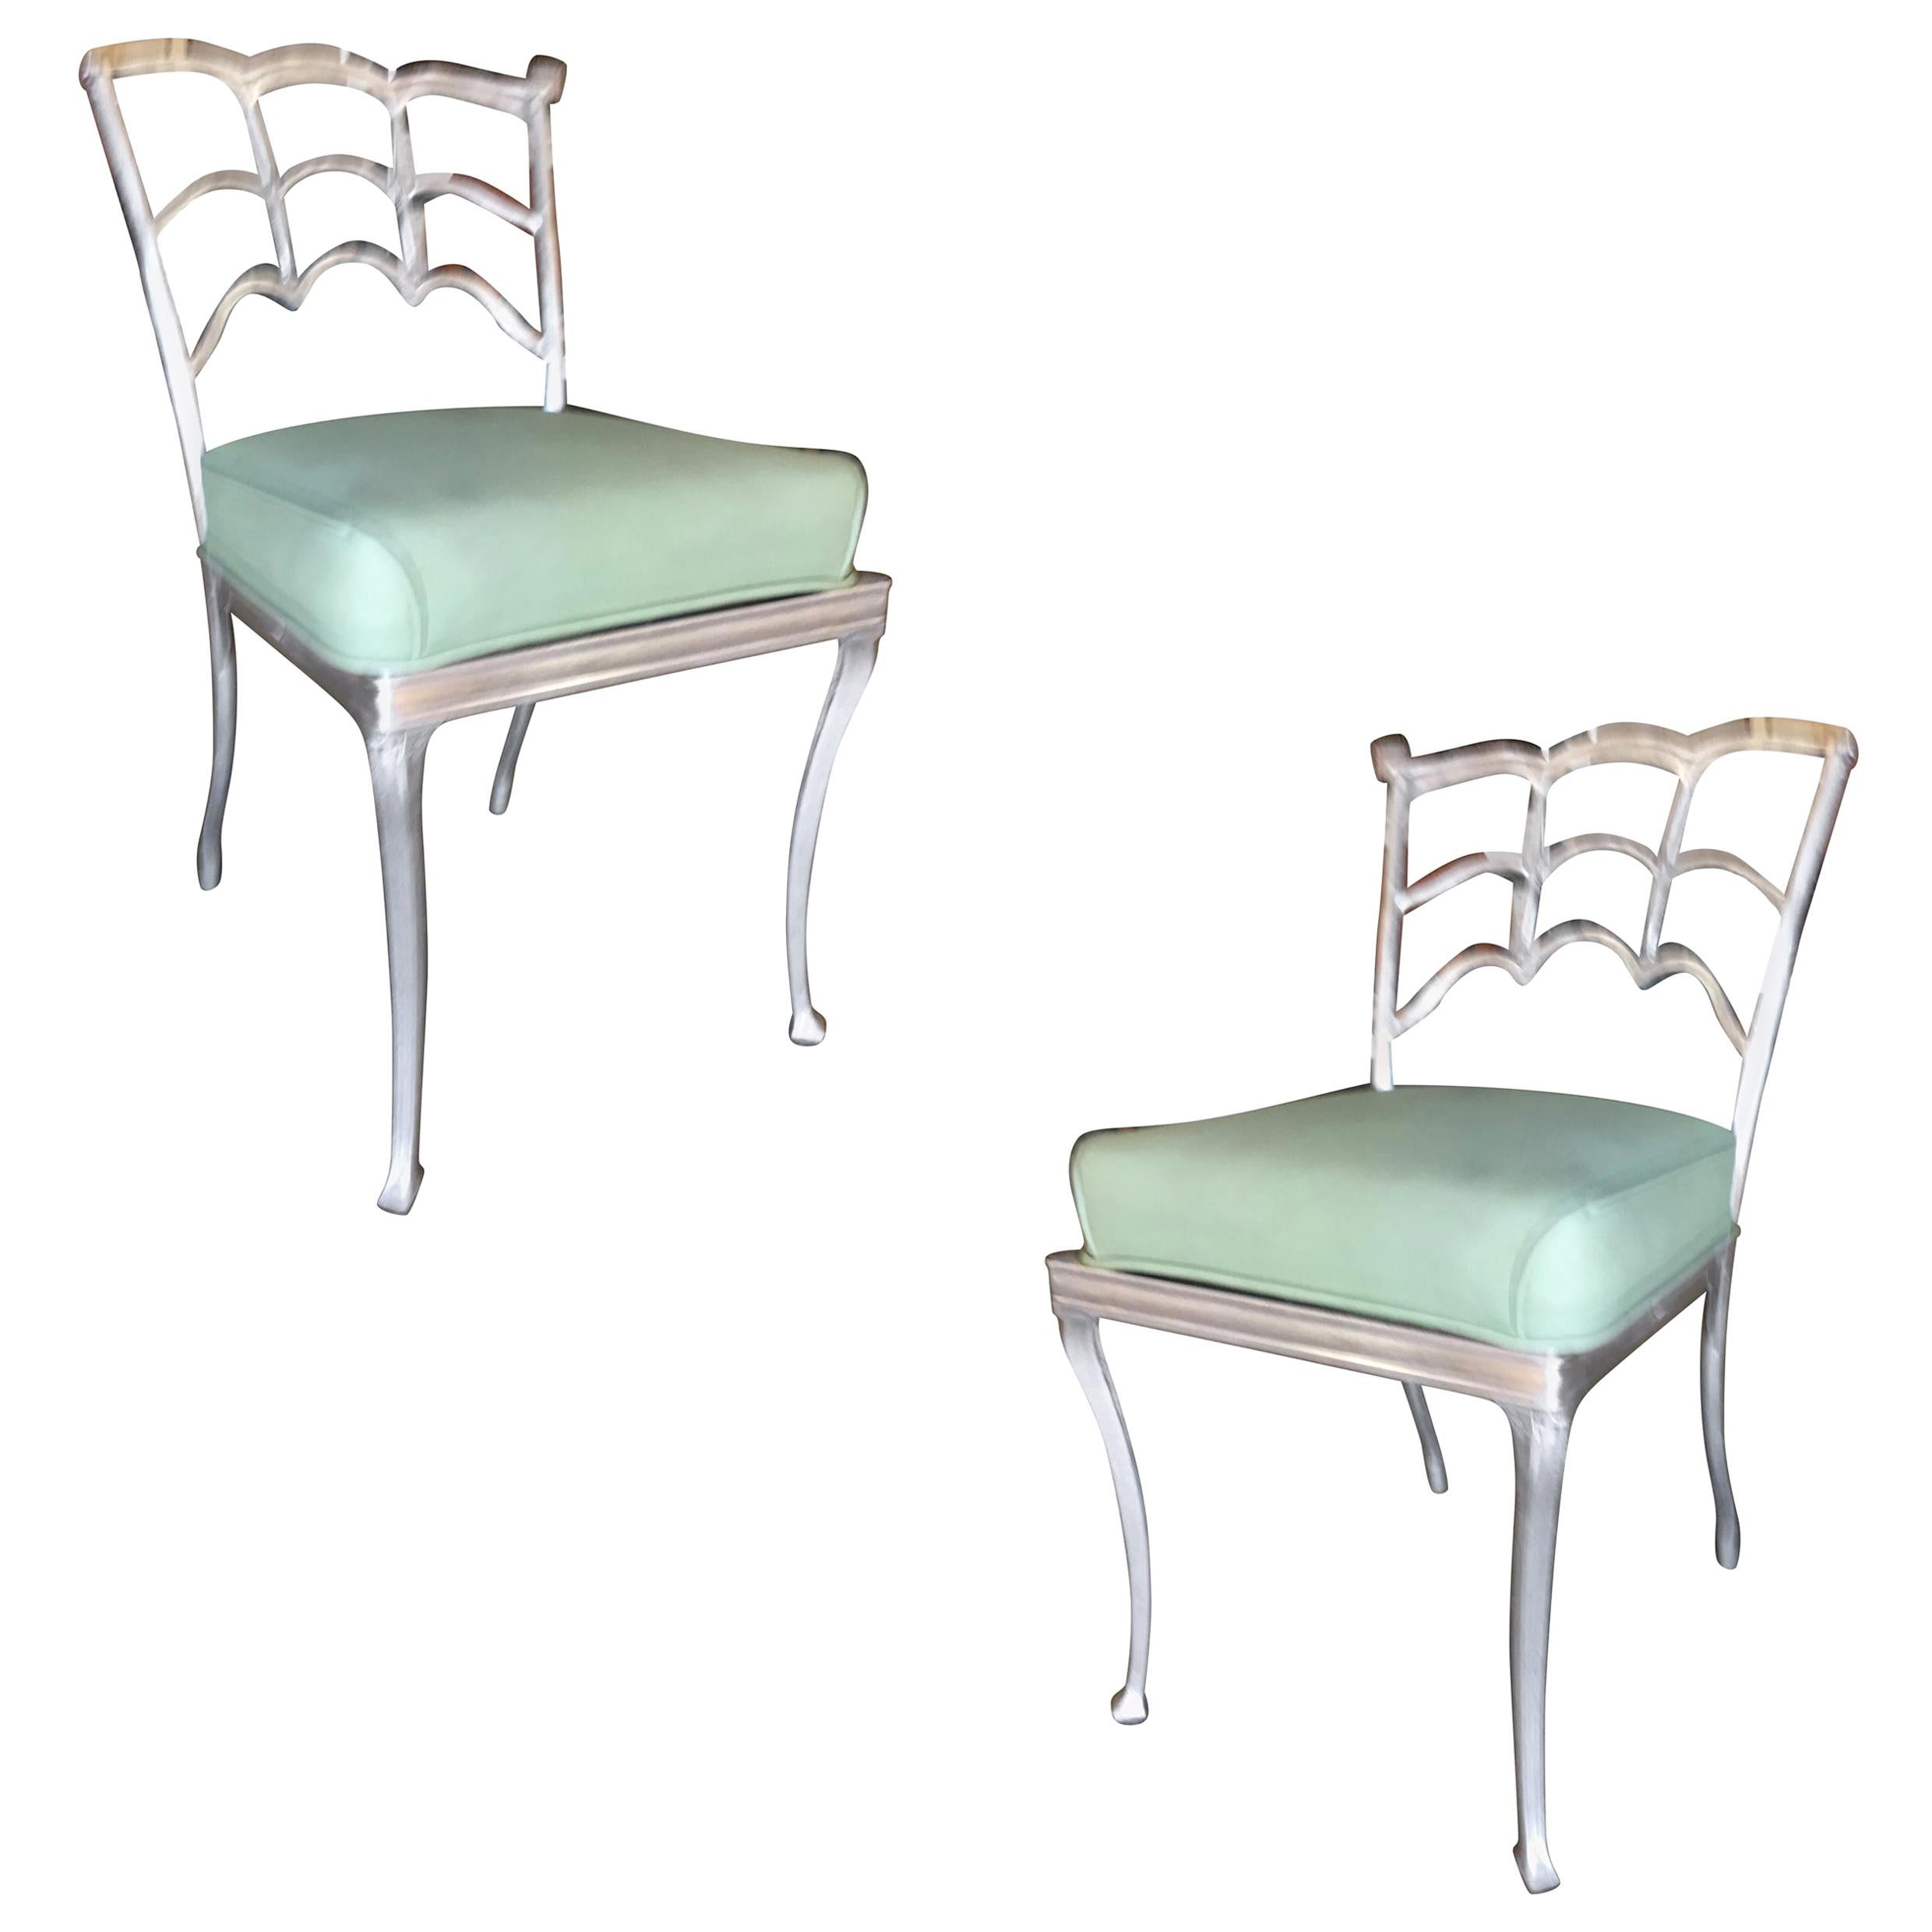 Art Deco Silver Tone Casted Aluminum Spiderweb Side Chair, Pair For Sale